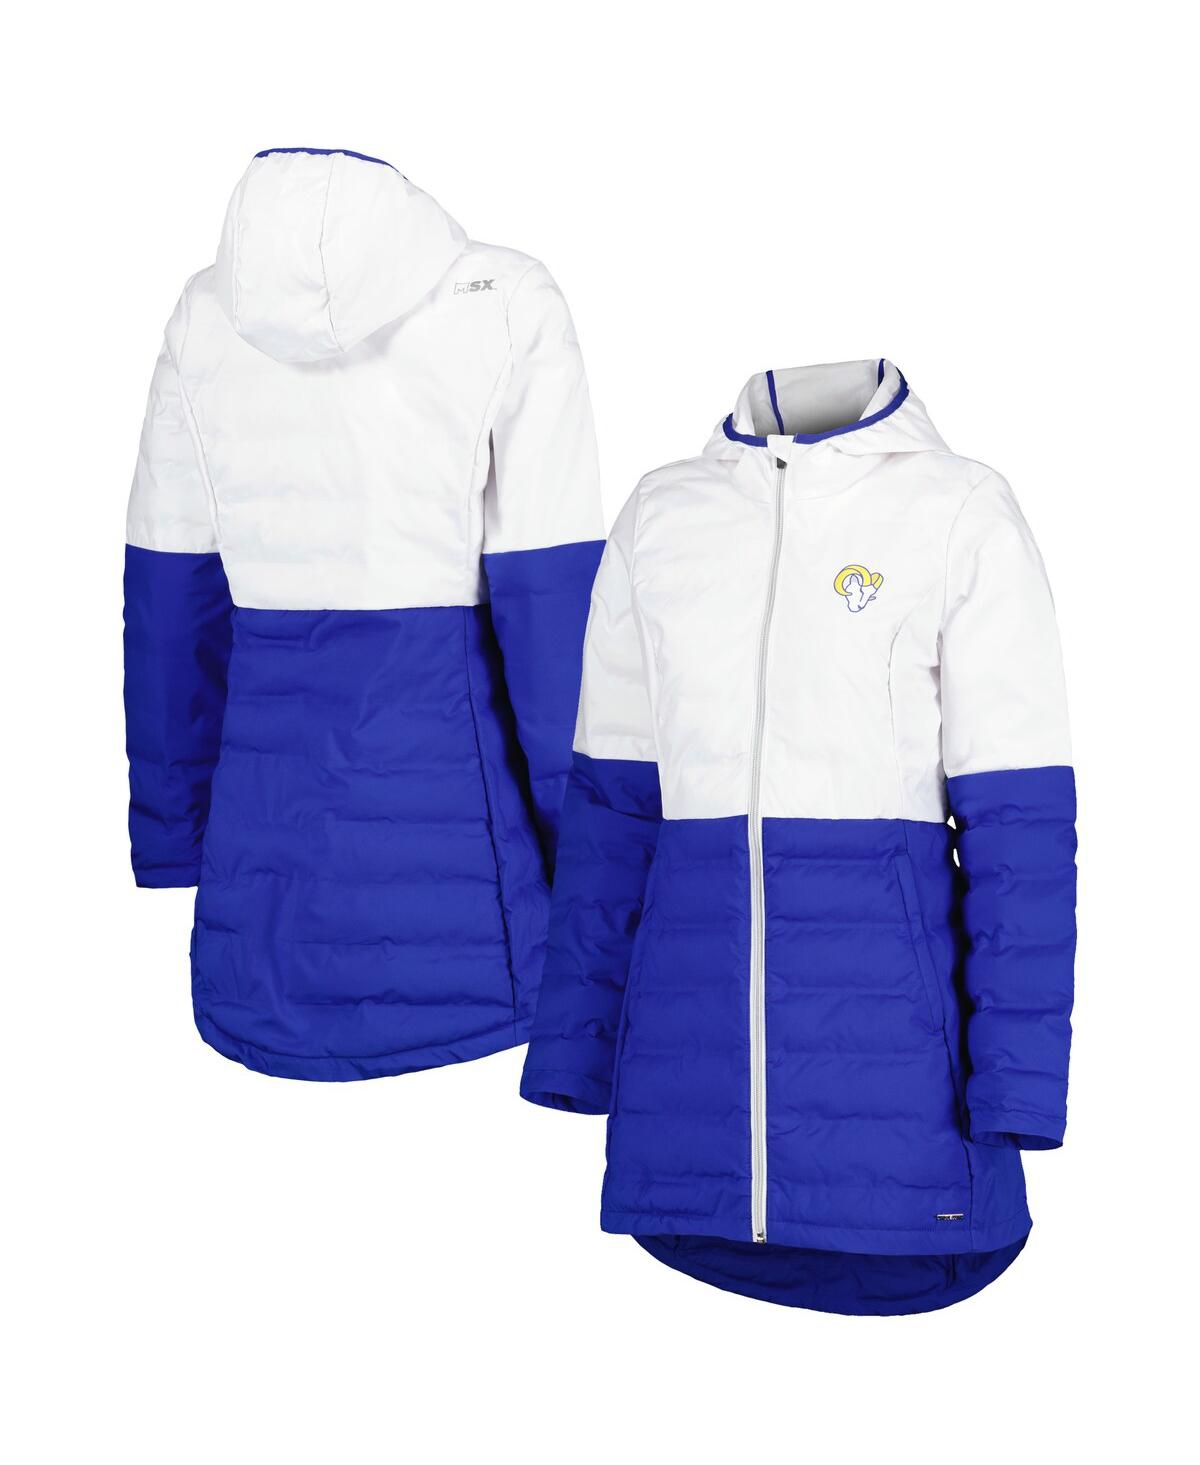 Women's Msx by Michael Strahan White, Royal Los Angeles Rams Willow Quilted Hoodie Full-Zip Jacket - White, Royal